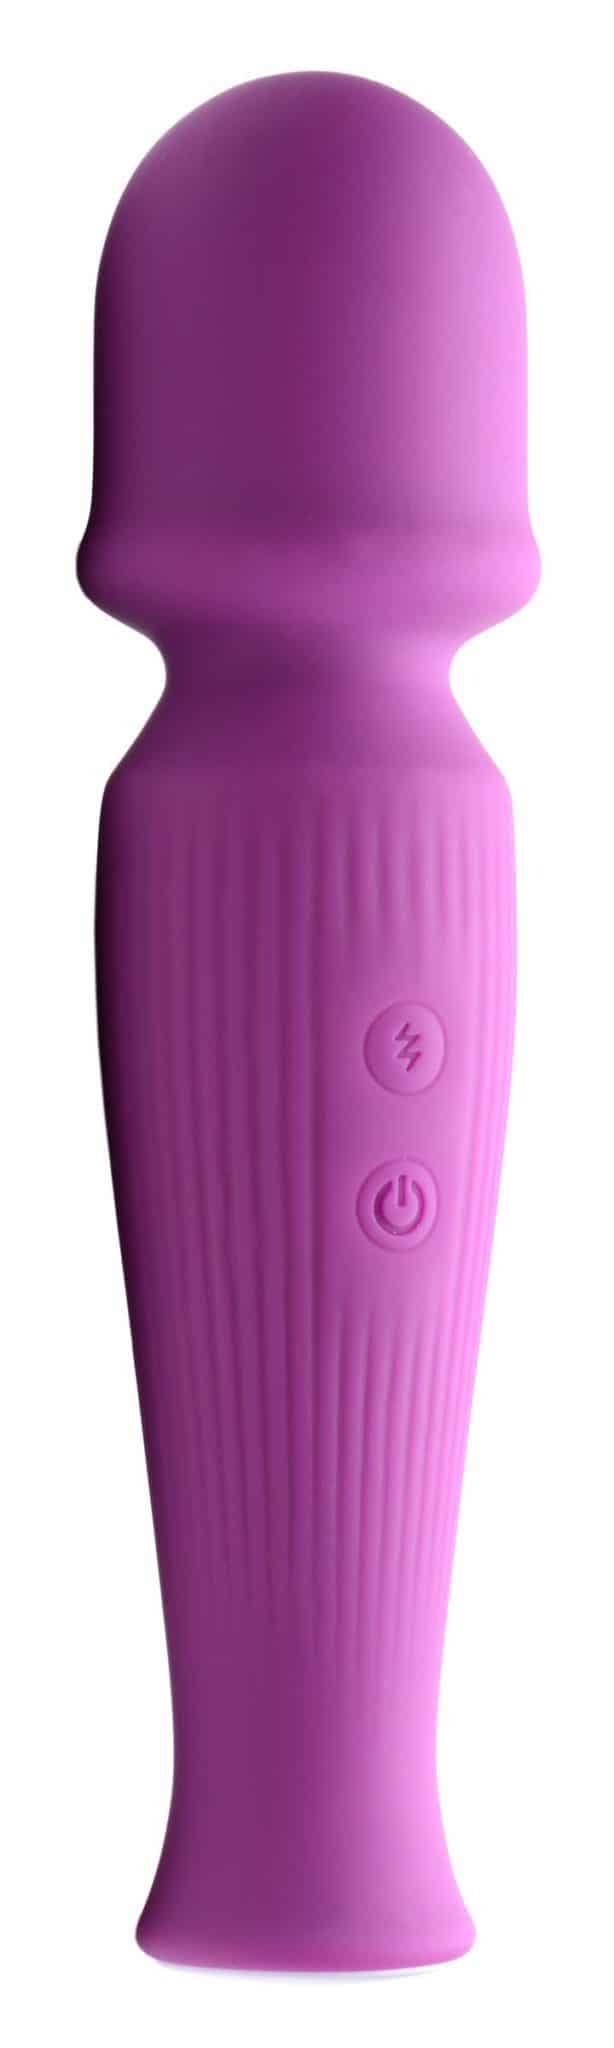 10X Silicone Wand Massager - Violet-7